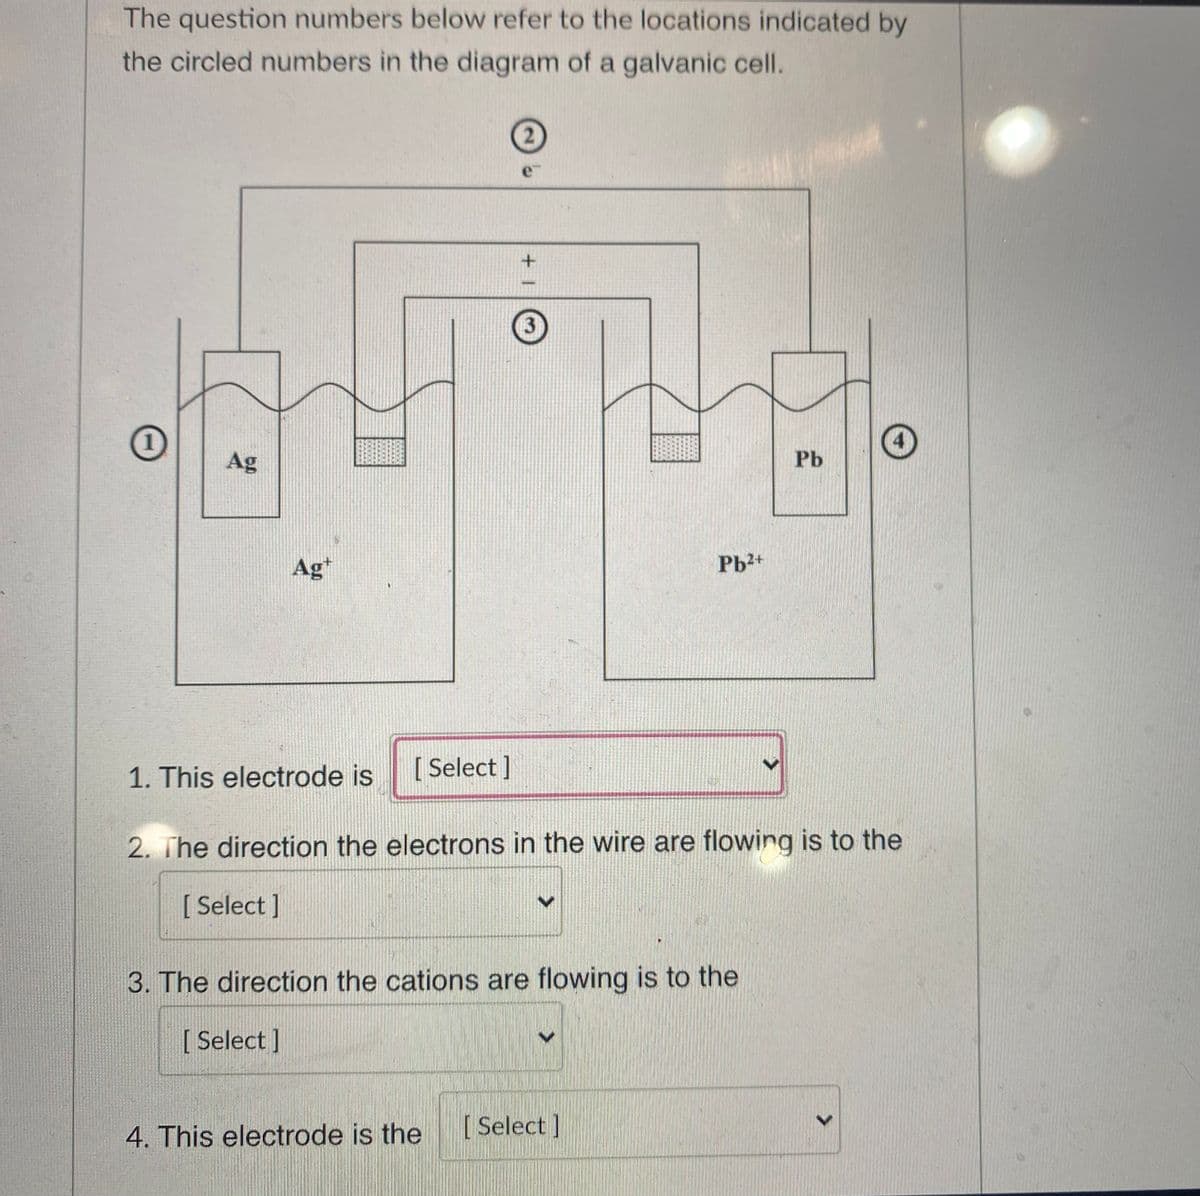 The question numbers below refer to the locations indicated by
the circled numbers in the diagram of a galvanic cell.
21
e
3
Ag
Pb
Ag*
Pb2+
1. This electrode is
[ Select ]
2. The direction the electrons in the wire are flowing is to the
[
[ Select]
3. The direction the cations are flowing is to the
[
[ Select ]
4. This electrode is the
[ Select]
